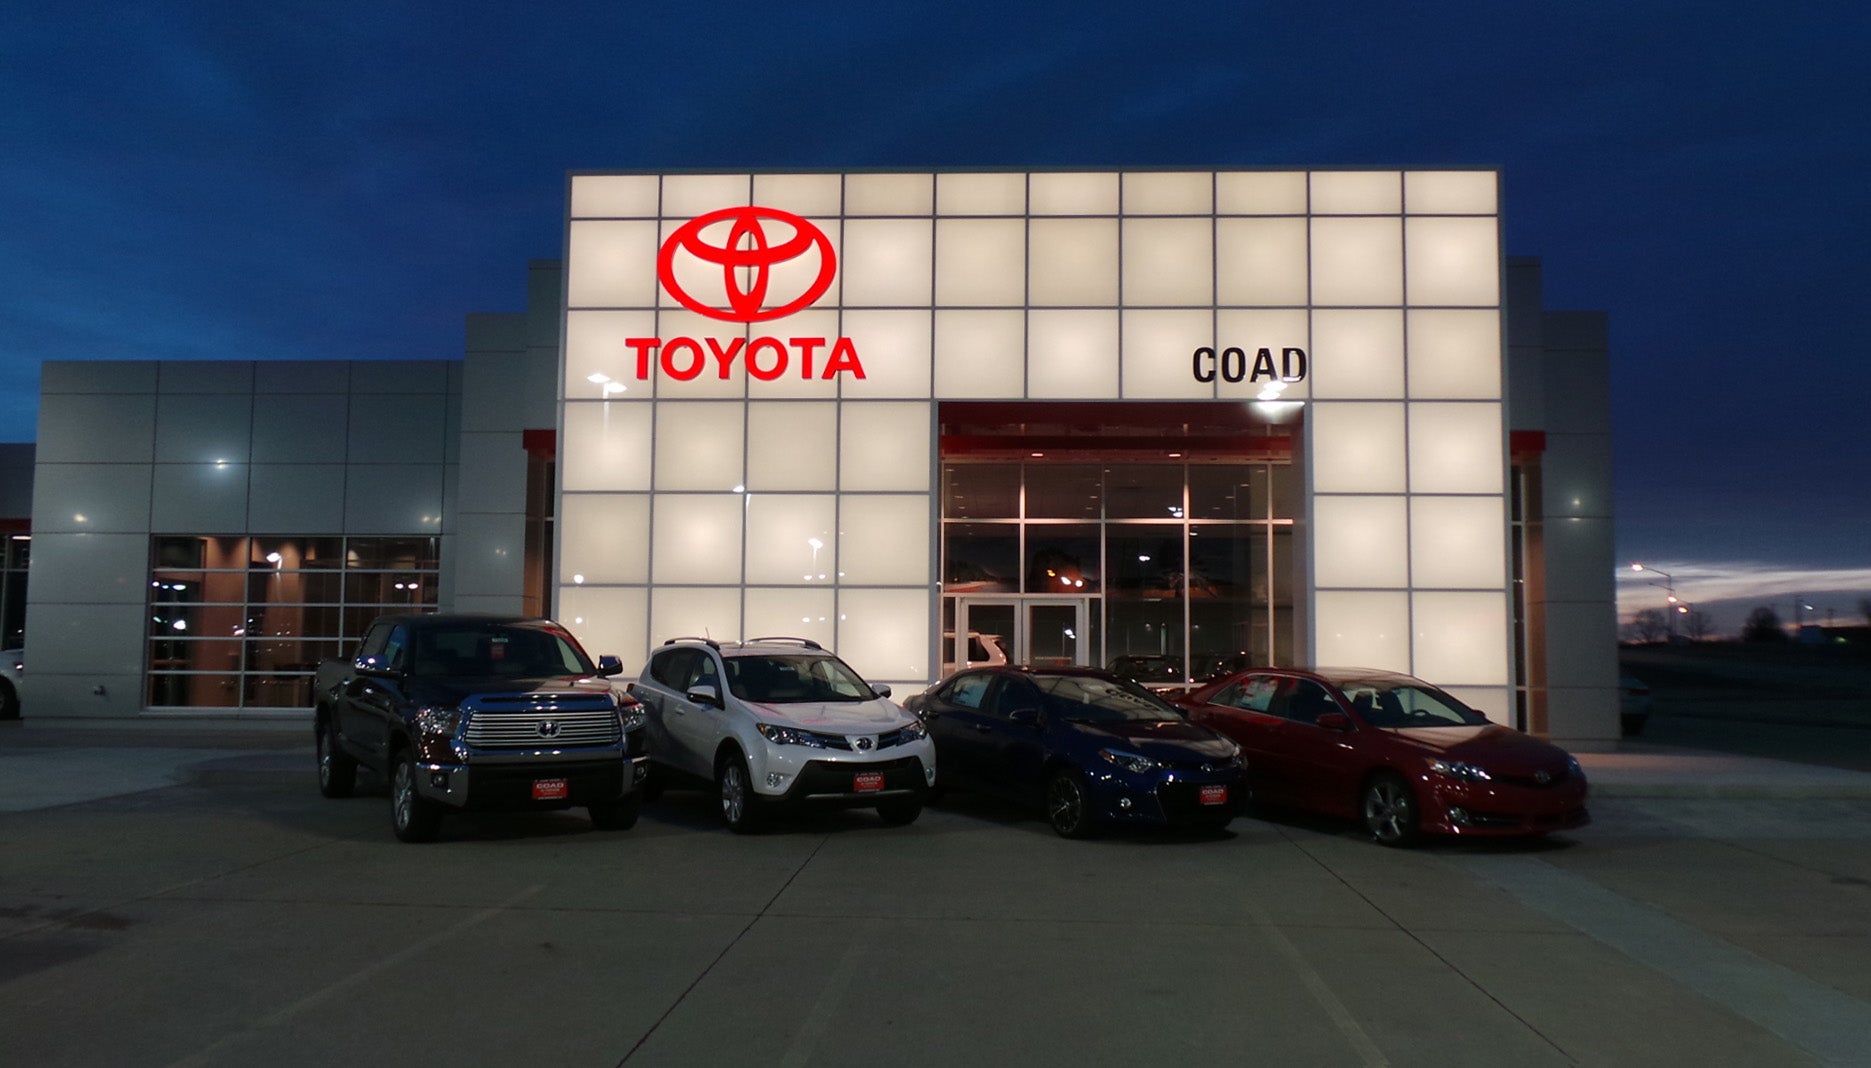 About Our Toyota Dealership